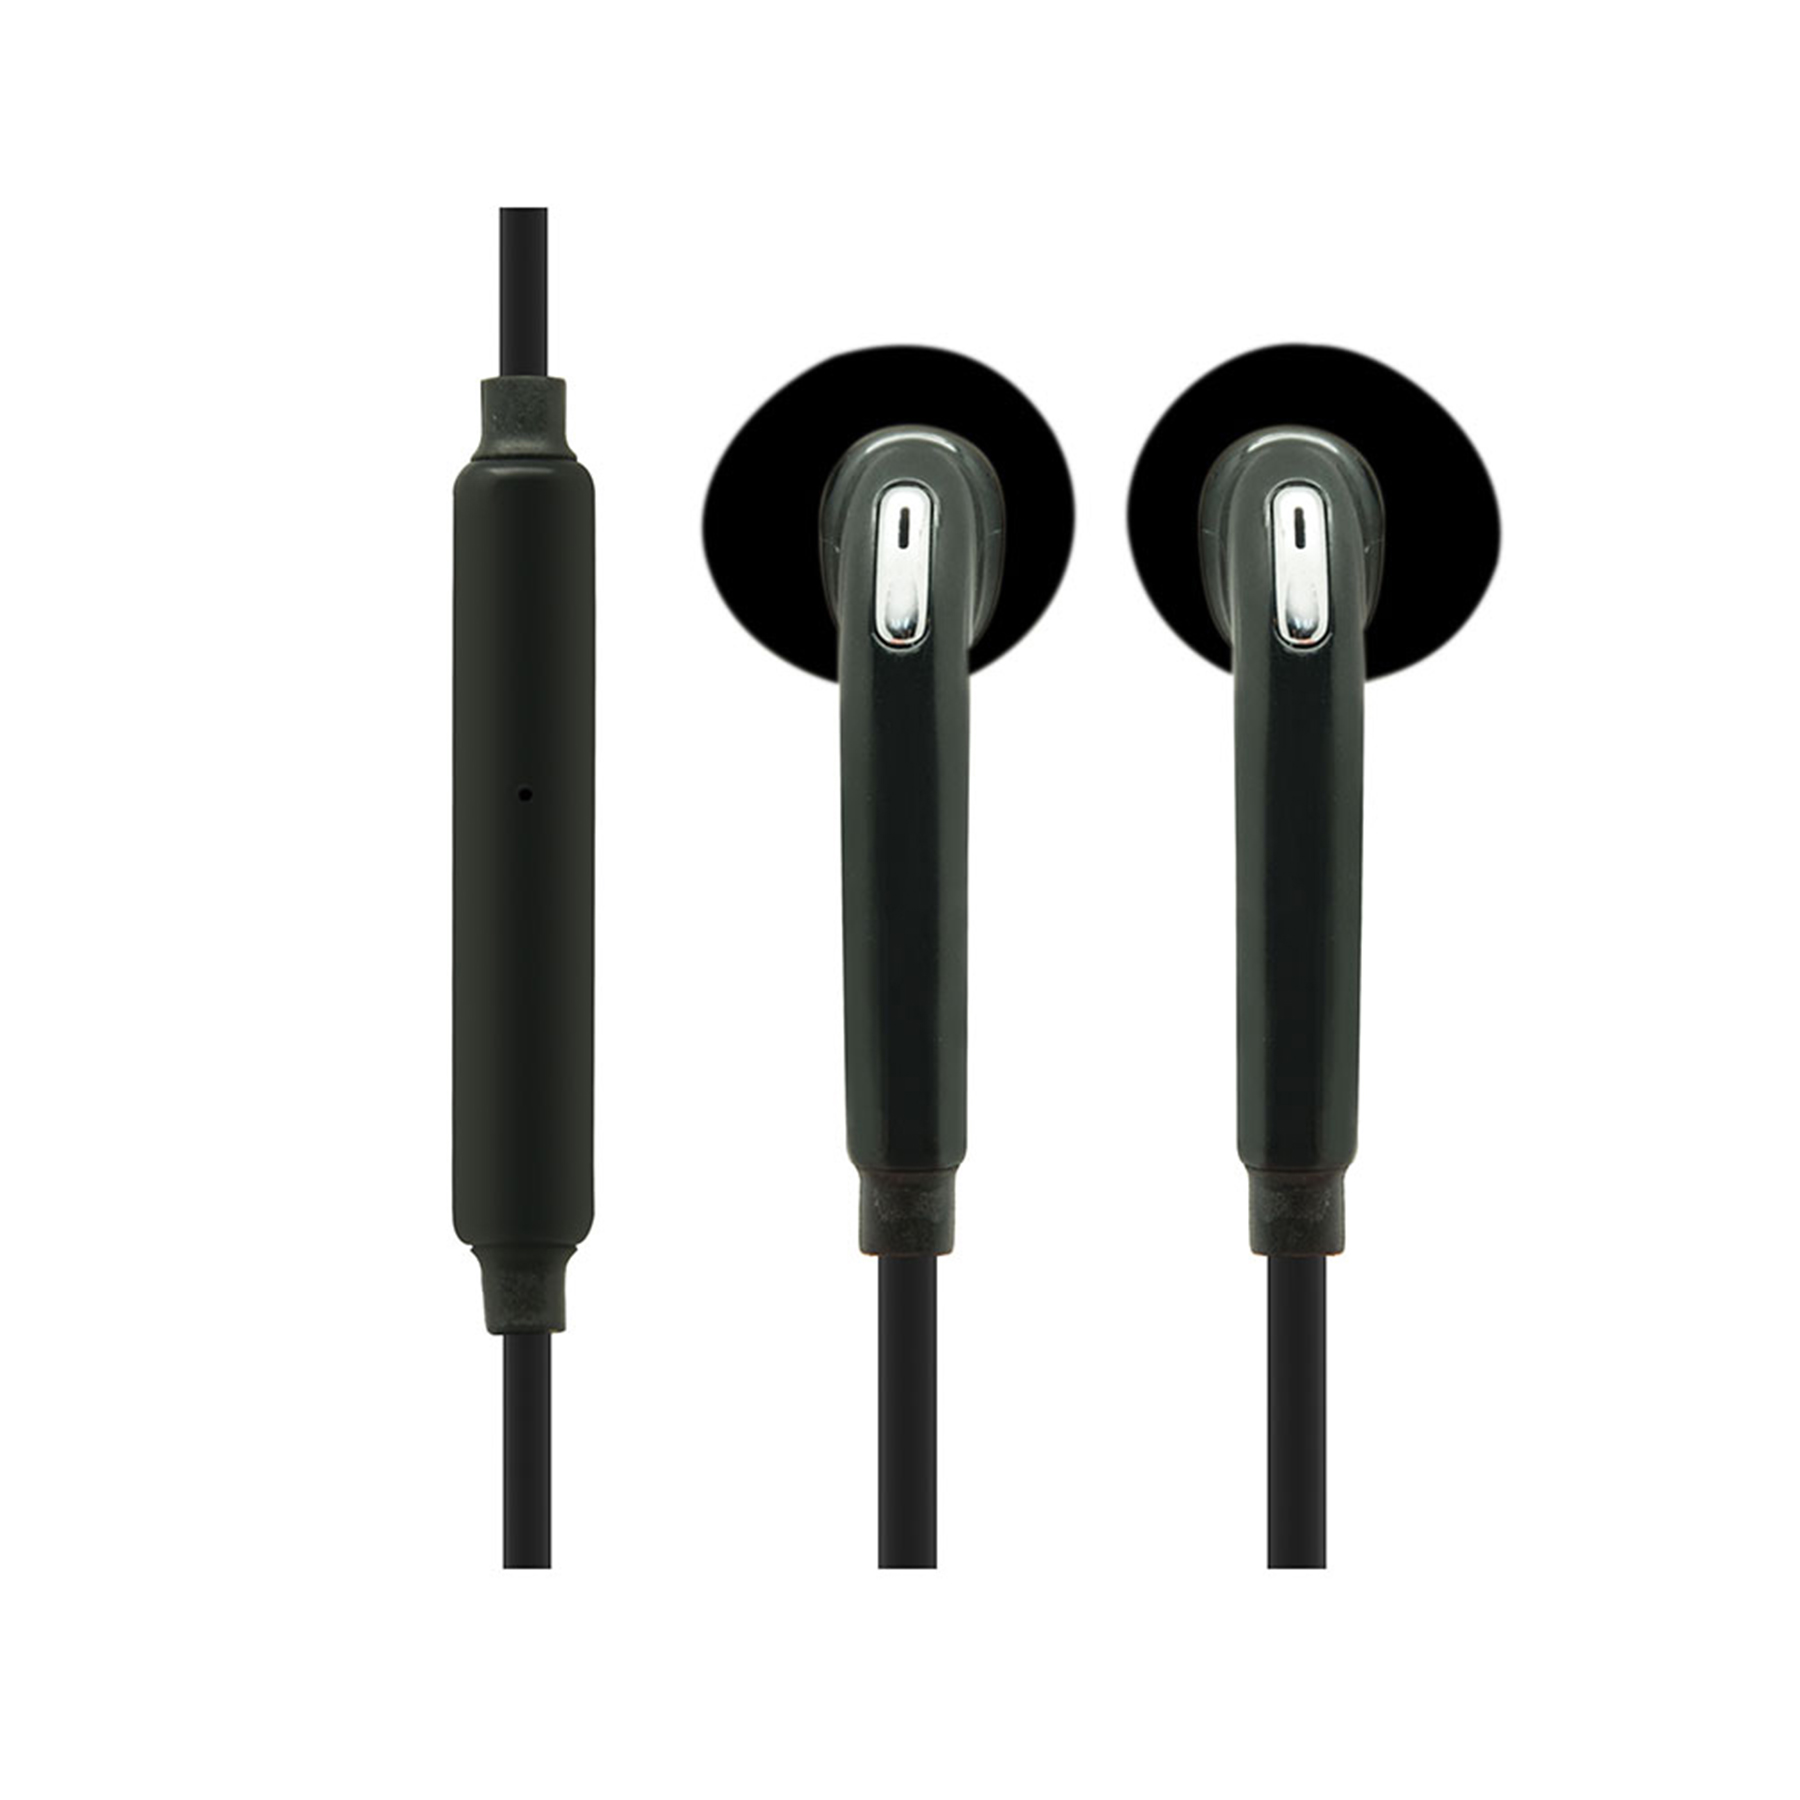 The Stardard Symphony Stereo Earbuds